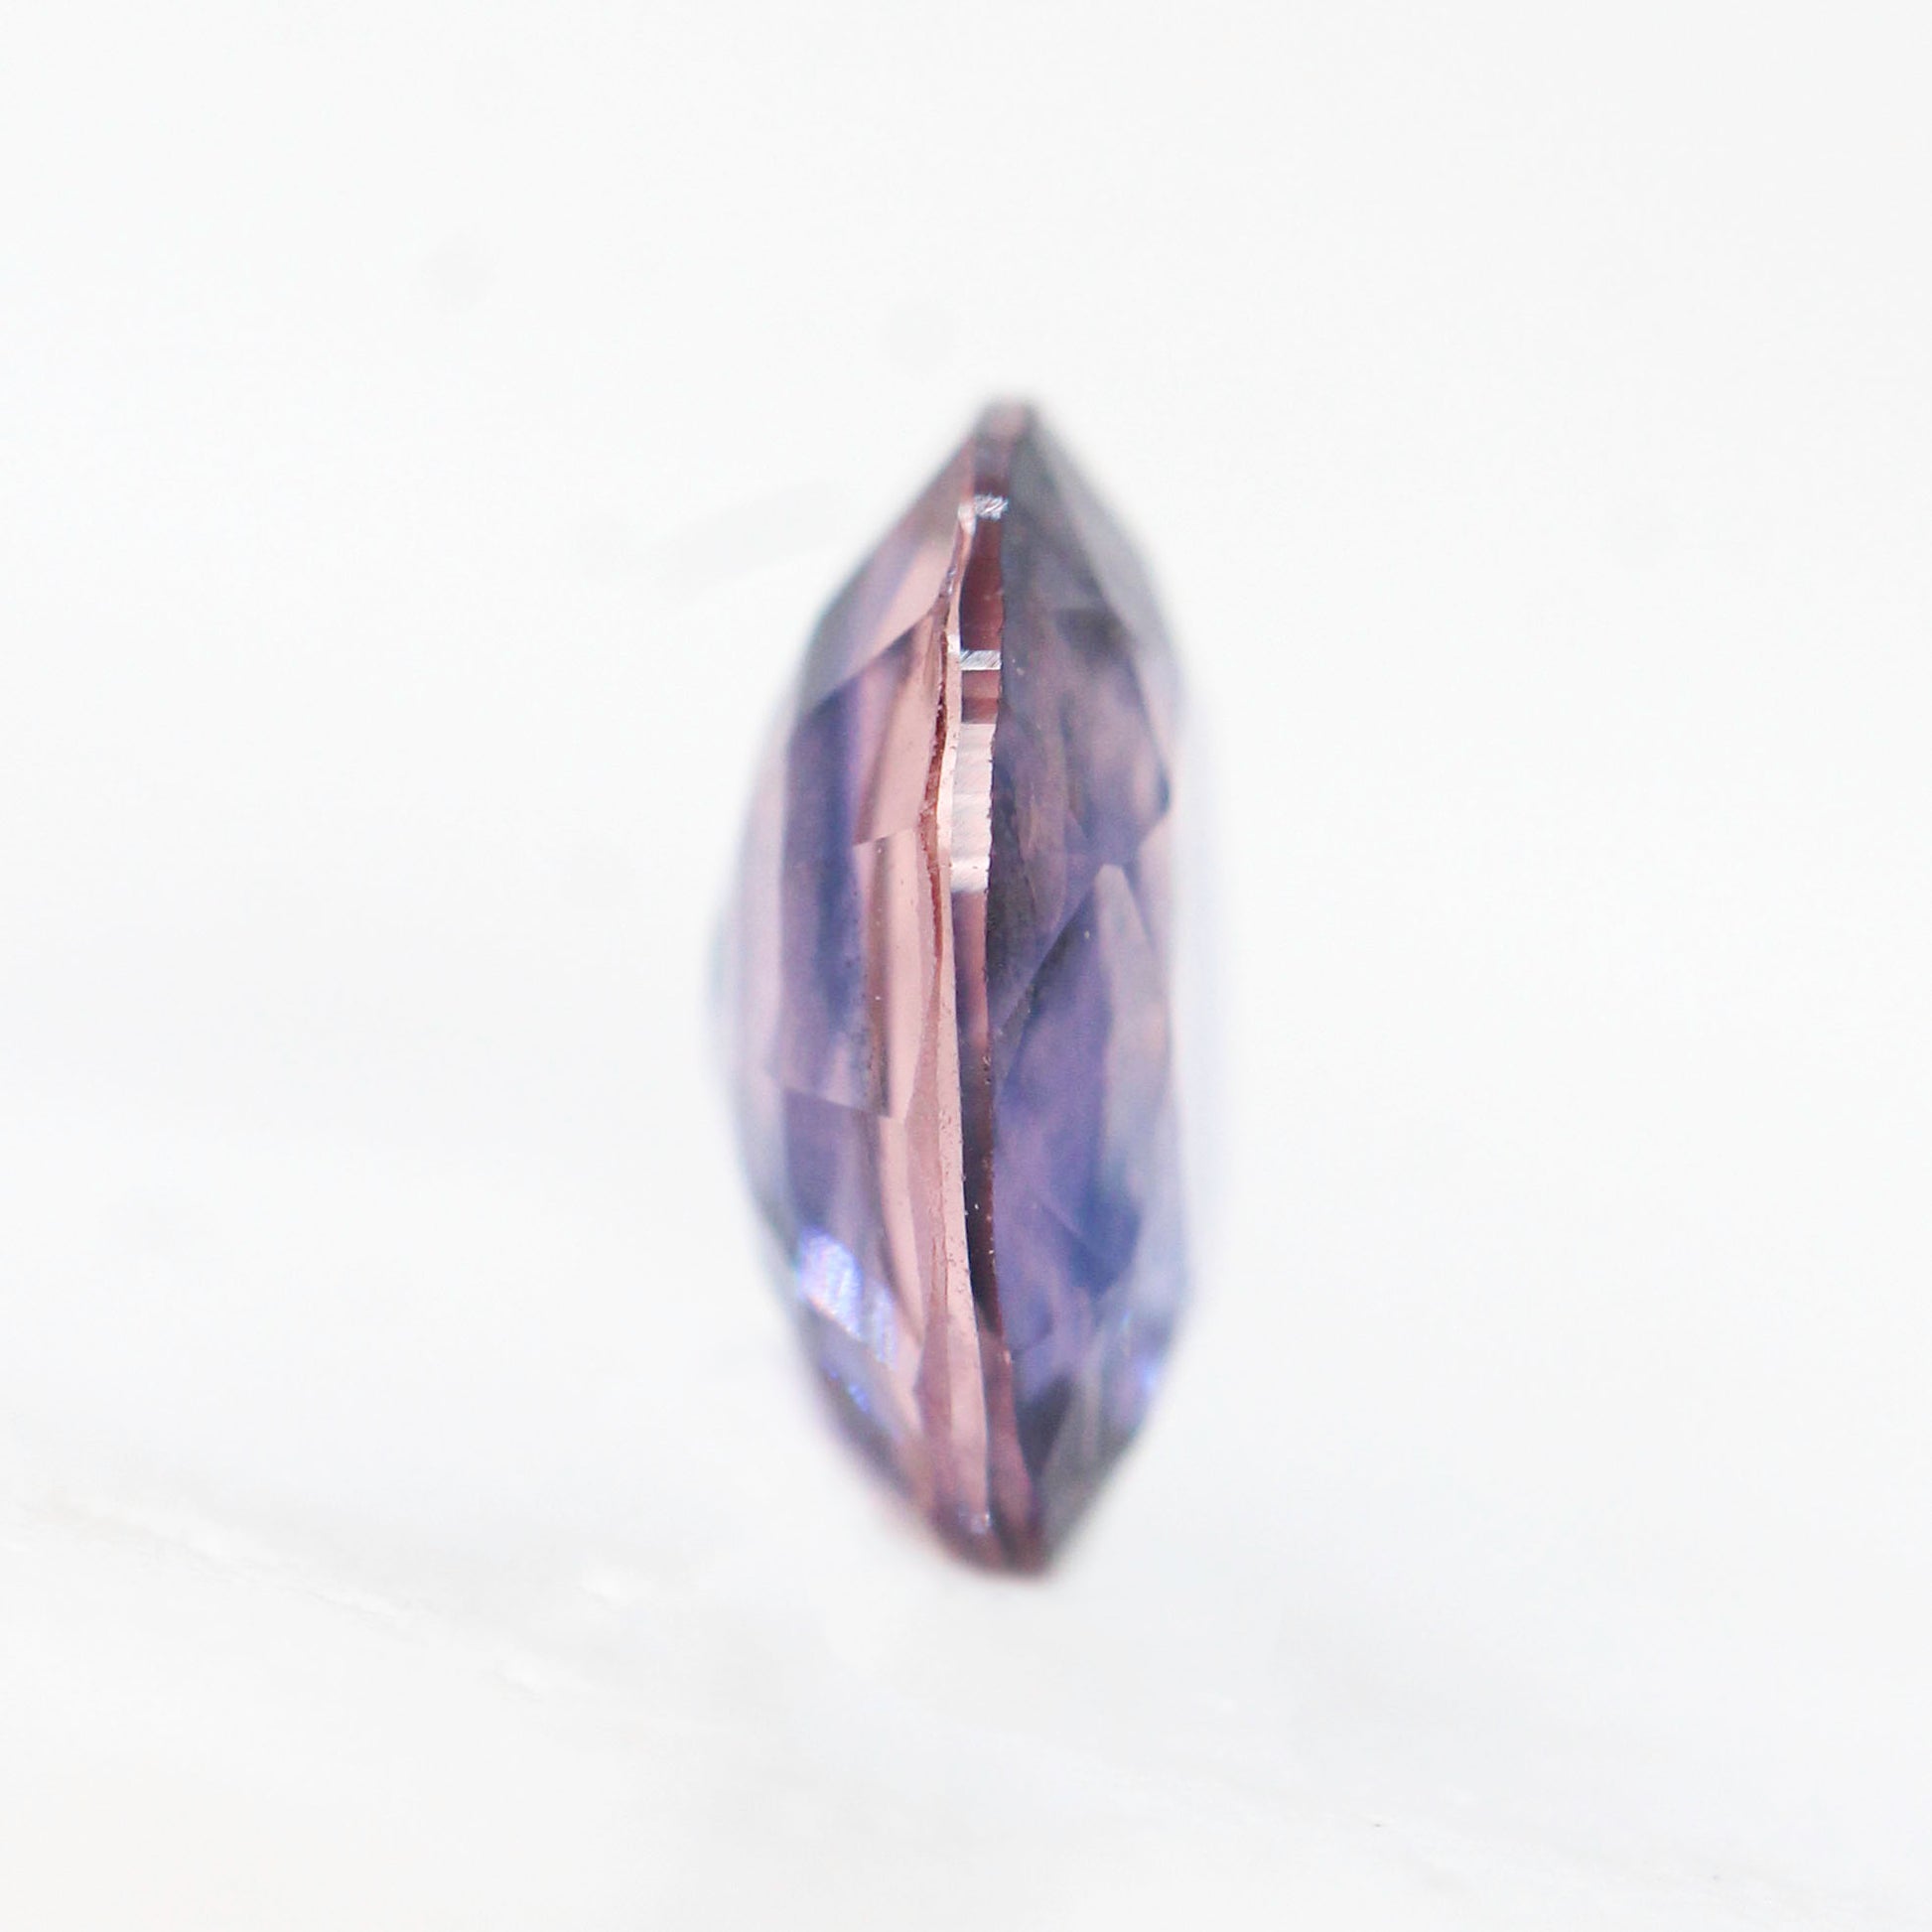 1.41 Carat Purple Oval Sapphire for Custom Work - Inventory Code POS141 - Midwinter Co. Alternative Bridal Rings and Modern Fine Jewelry